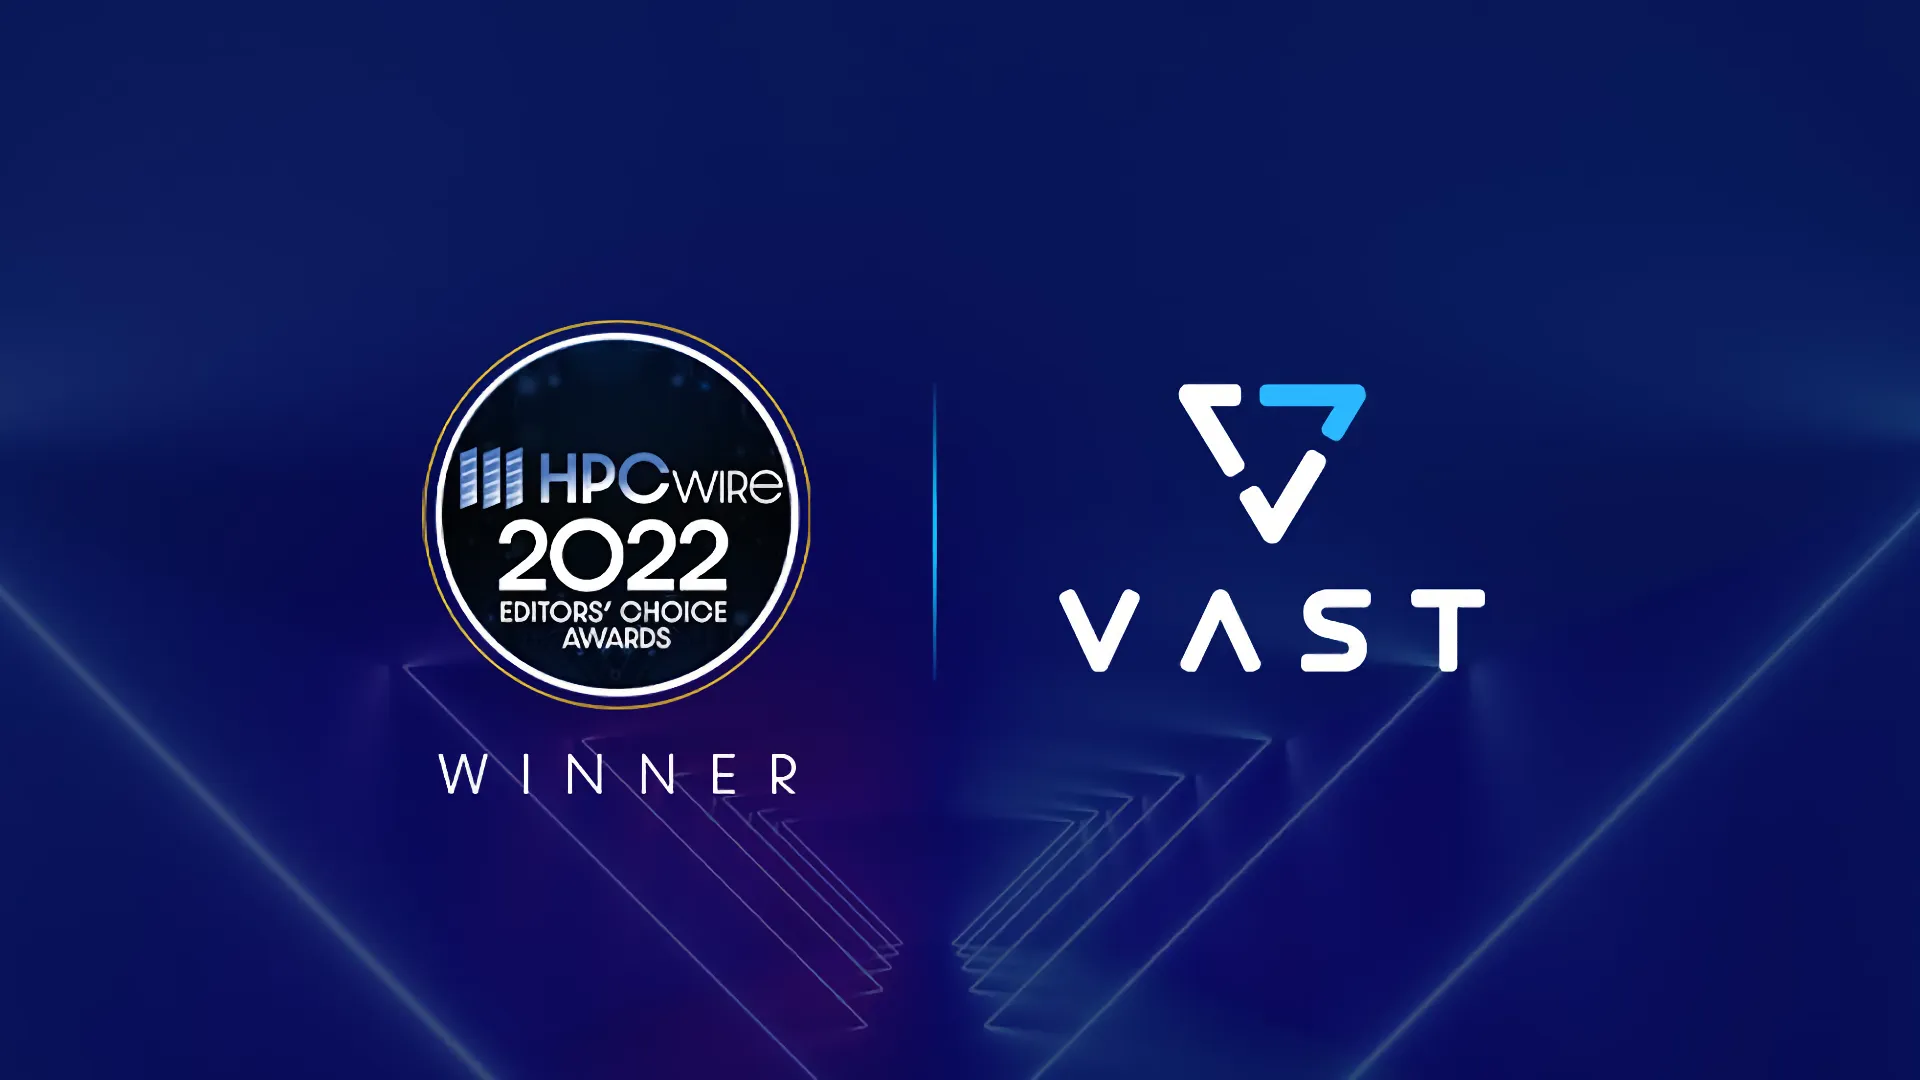 VAST Data Wins HPCwire Editors’ Choice Award for Best HPC Storage Product or Technology 